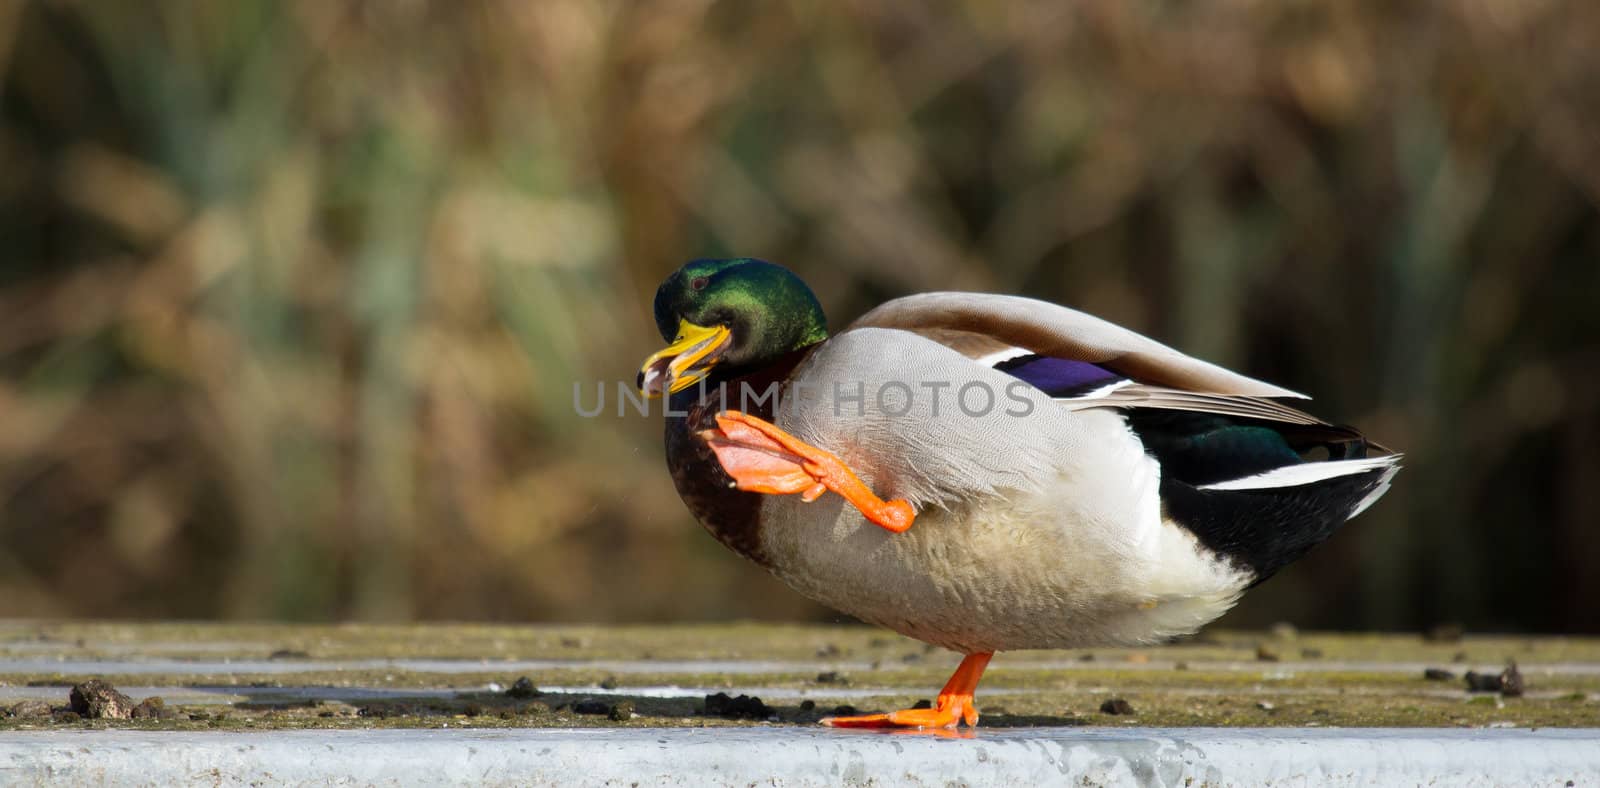 A wild duck in a funny position